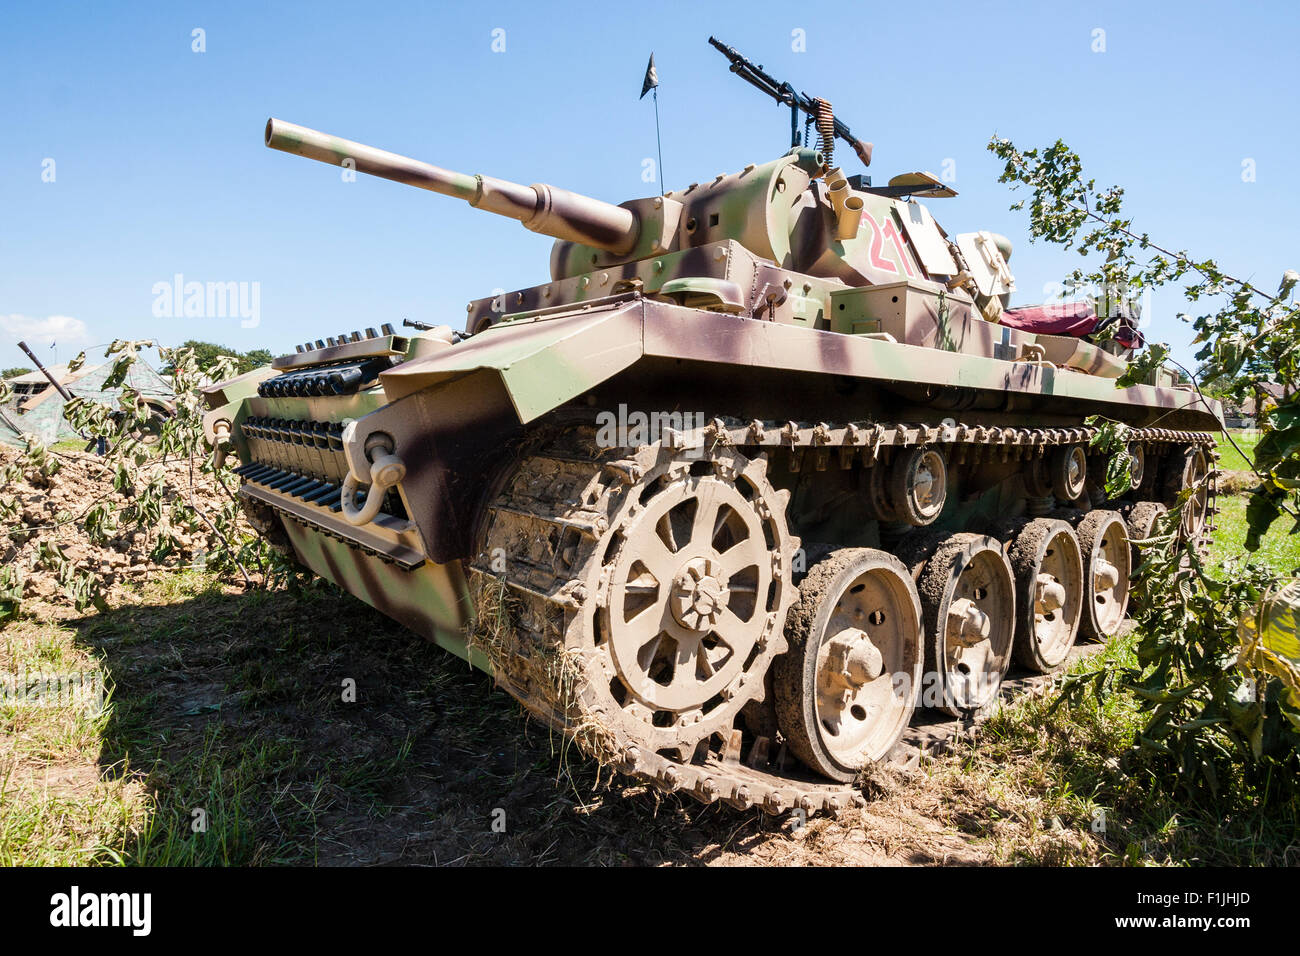 Living history re-enactment of world war two. A German Panzer IV medium tank . Close up with tank filling frame. Parked on grass, with blue sky. Stock Photo